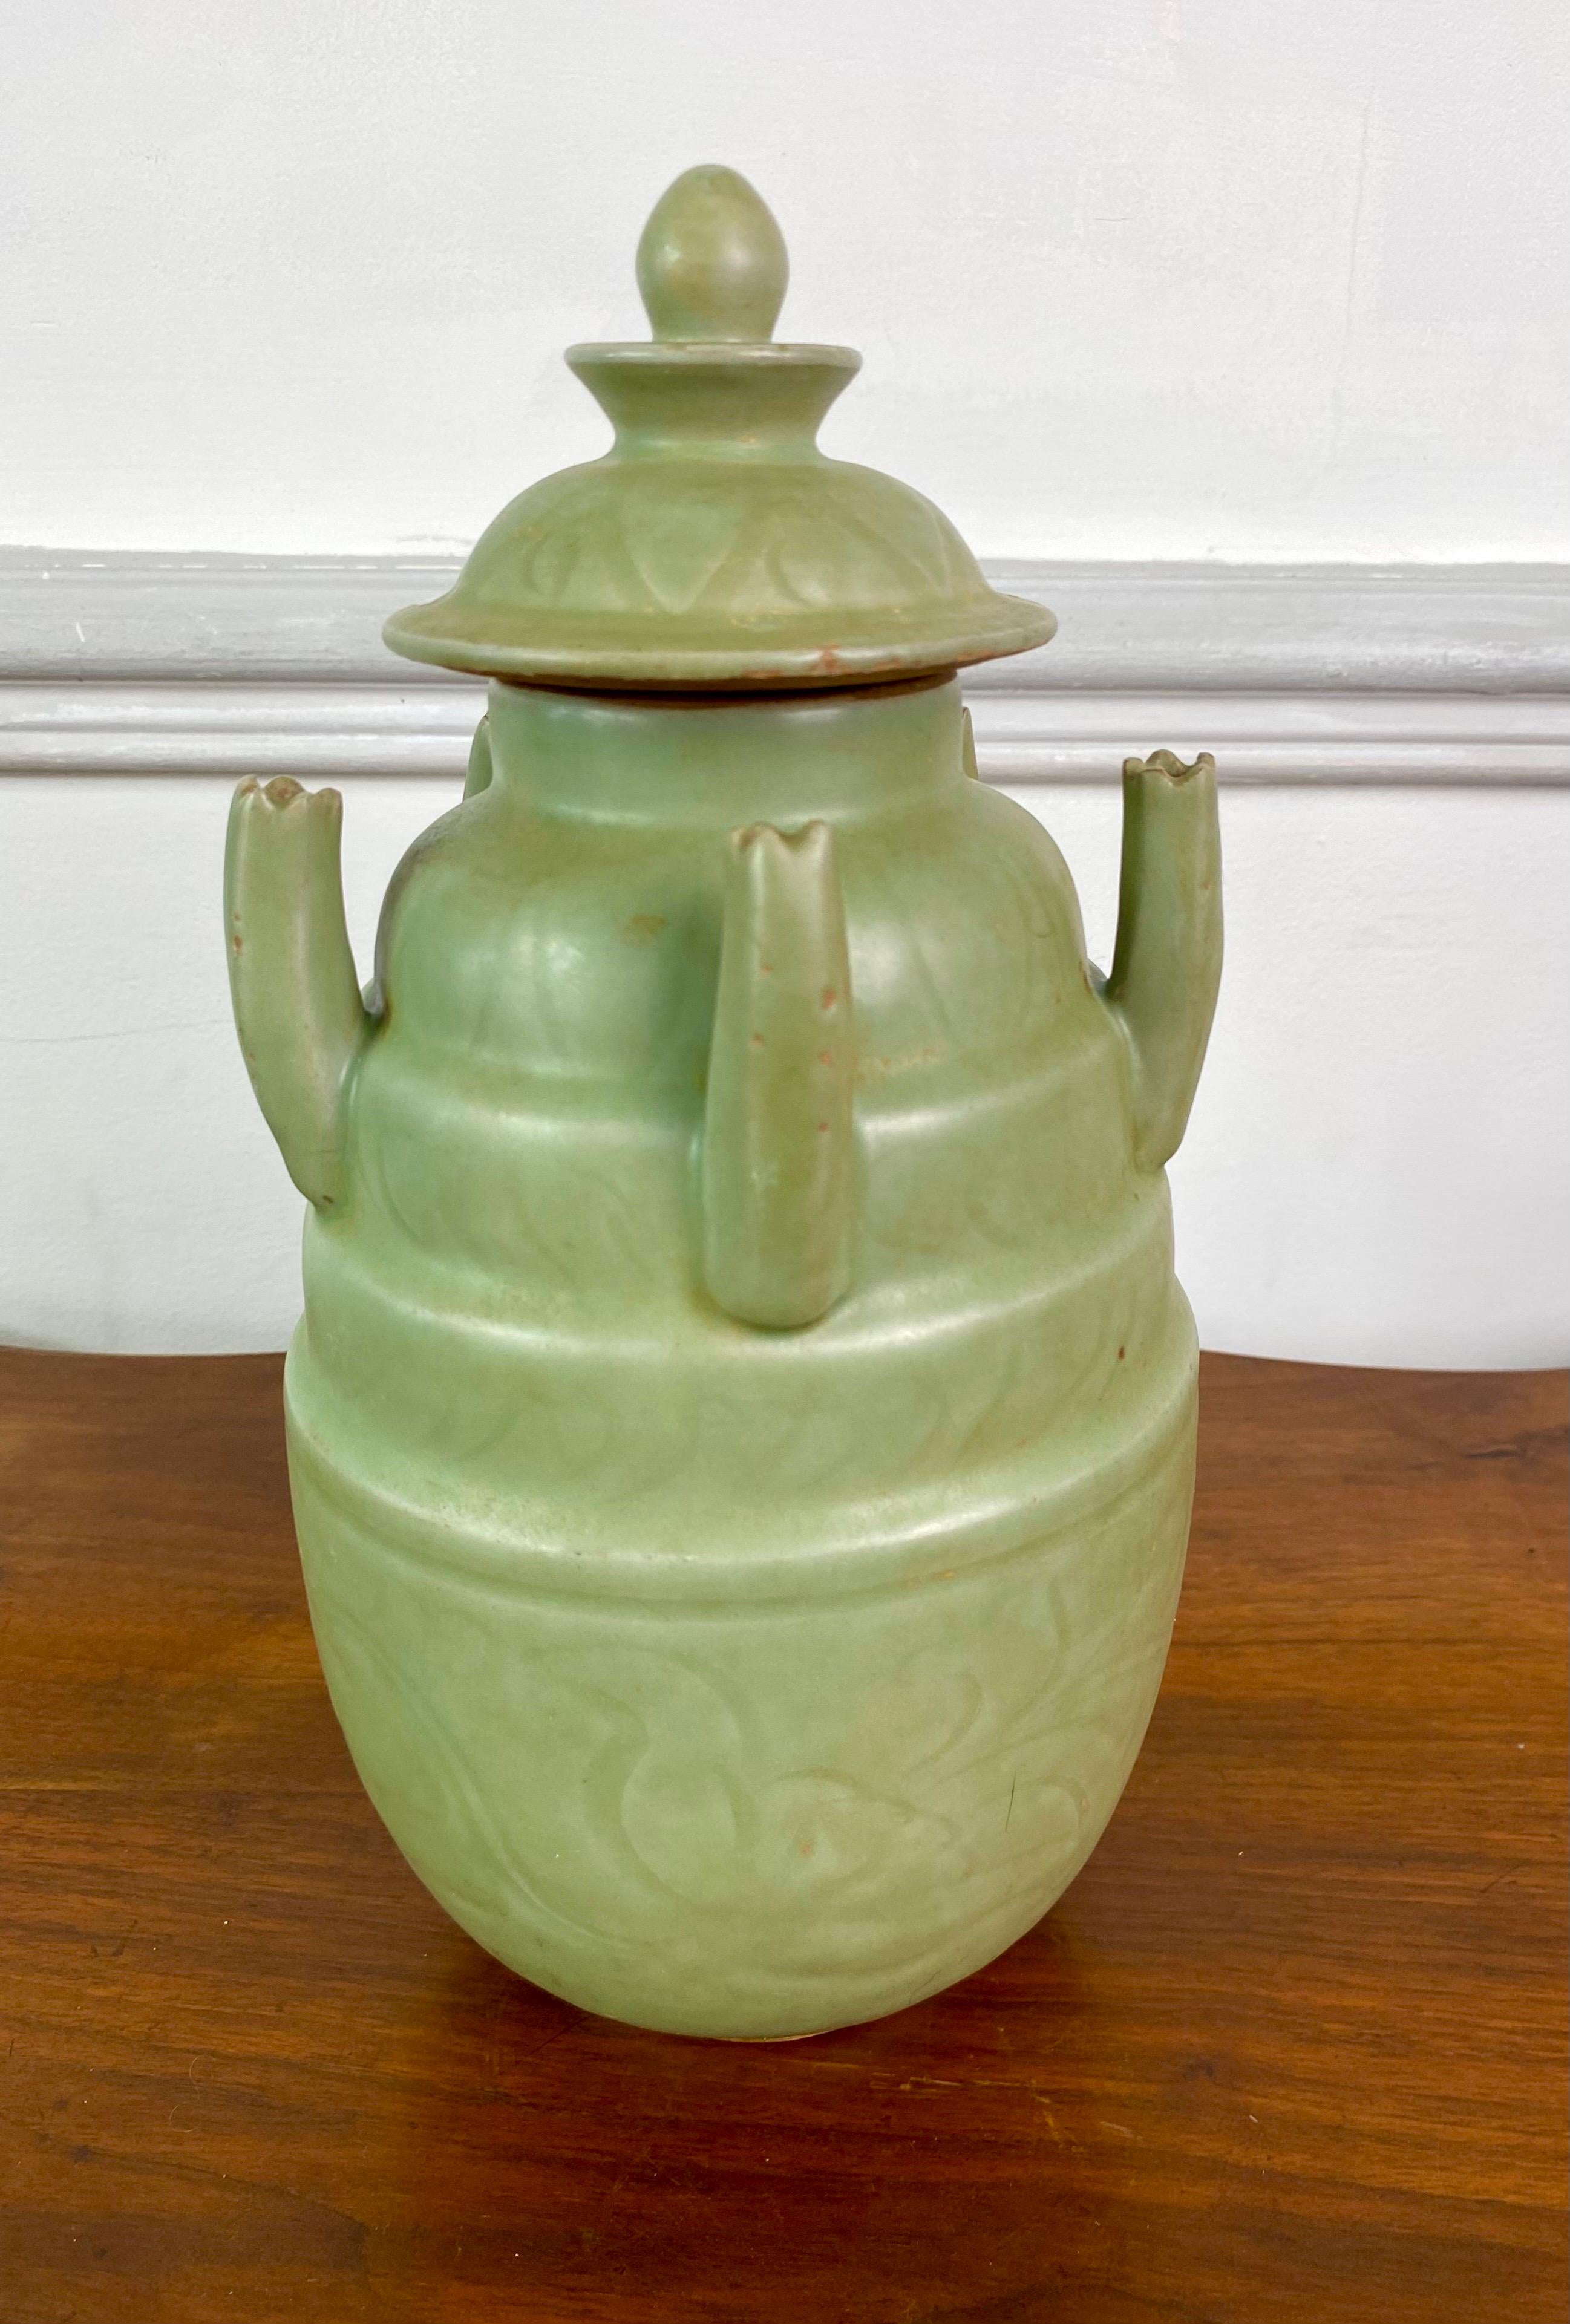 Very pretty covered vase, pot, with 5 tubes / spouts from the Longquan Celadon Ovens.
The vase and its lid are in Celadon-glazed porcelain stoneware decorated with flowers and foliage.
This very pretty Covered Vase with five Wuguan Ping tubes,